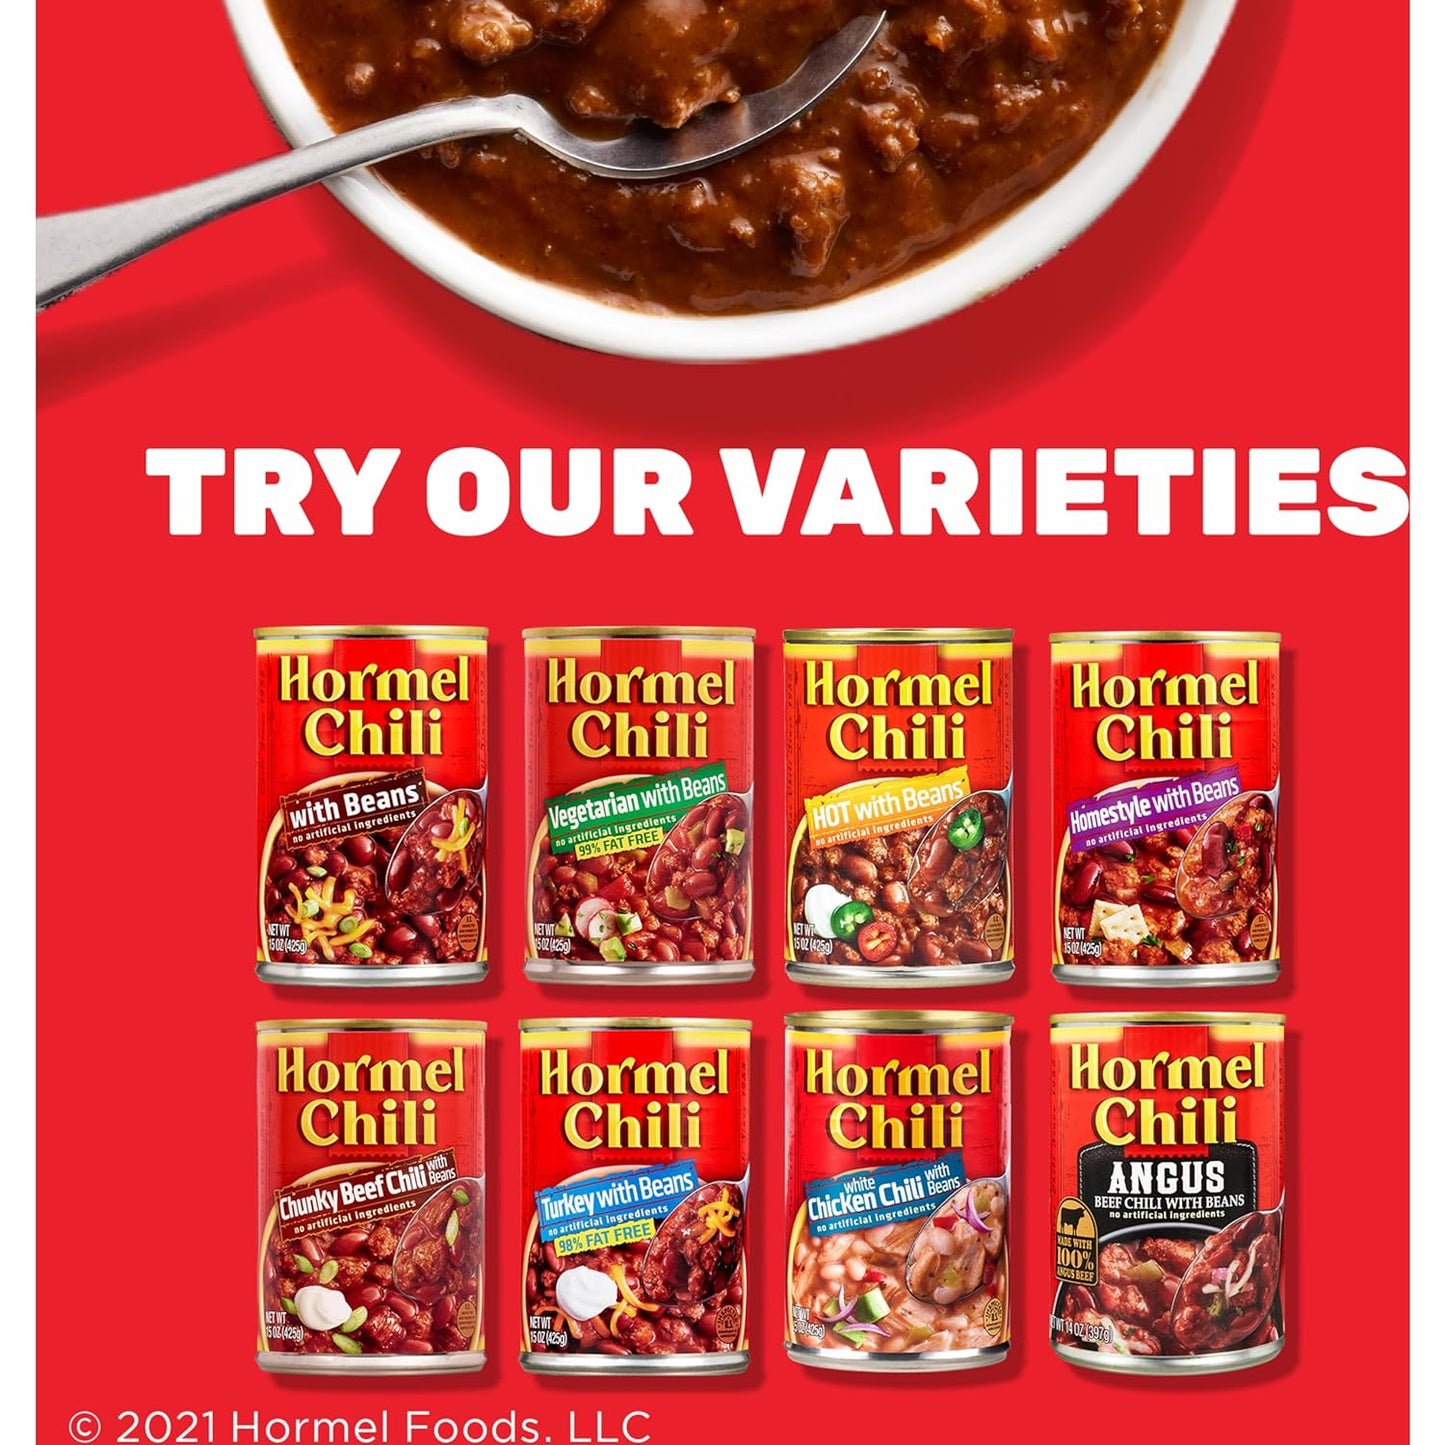 Hormel Chili With Bean & DINTY MOORE Beef Stew Variety Pack, 15 oz. cans (8-pack)